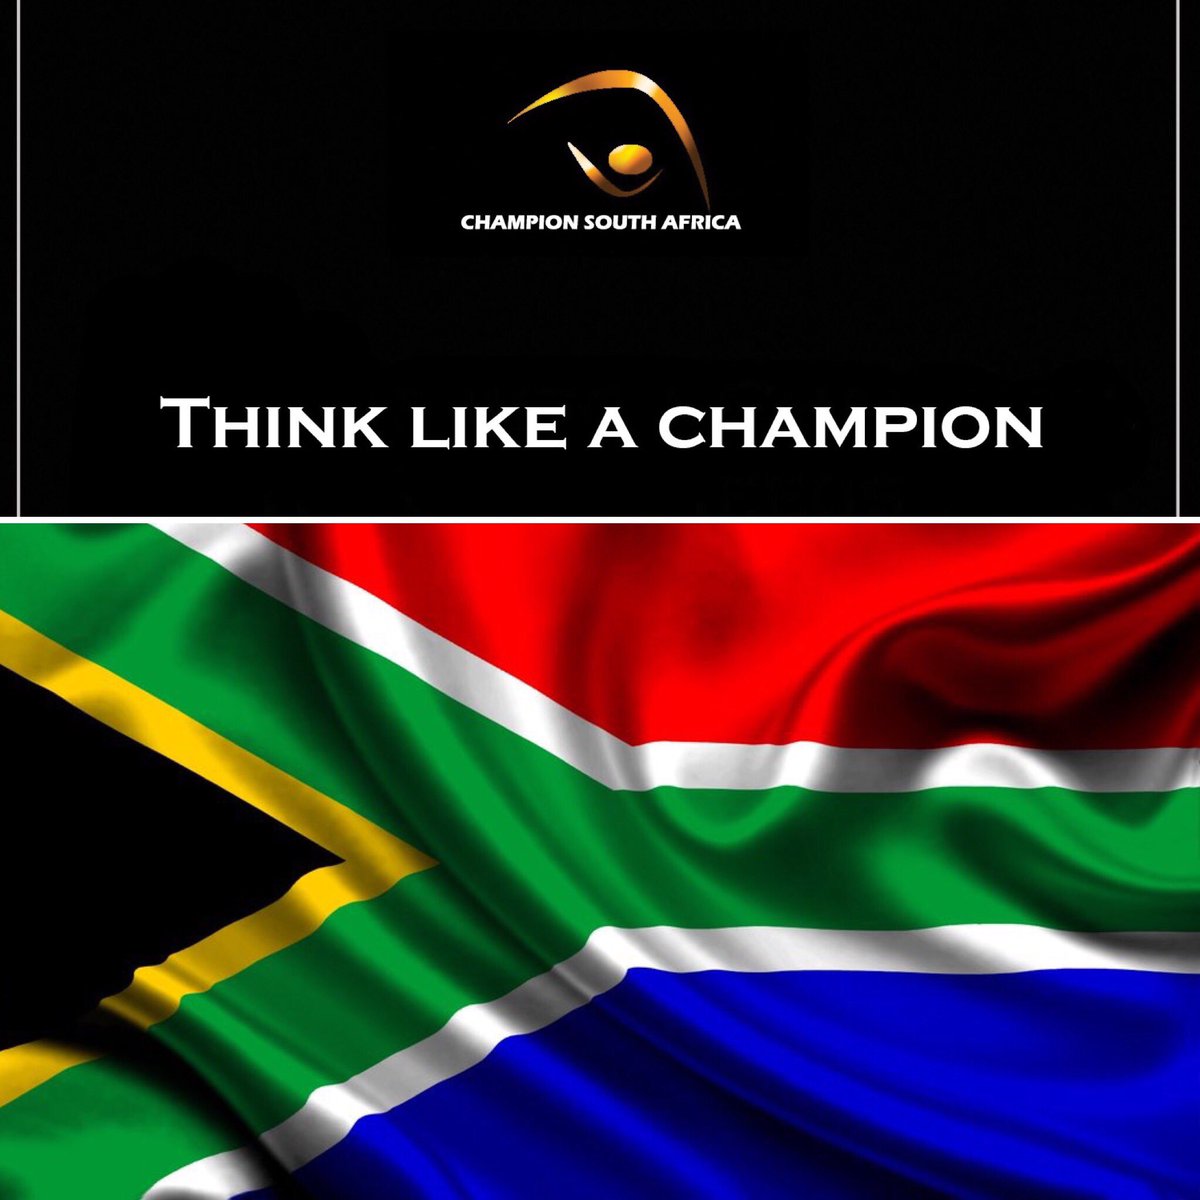 #FreedomDay gave u the right to become a champion & the responsibility to build #ChampionSouthAfrica